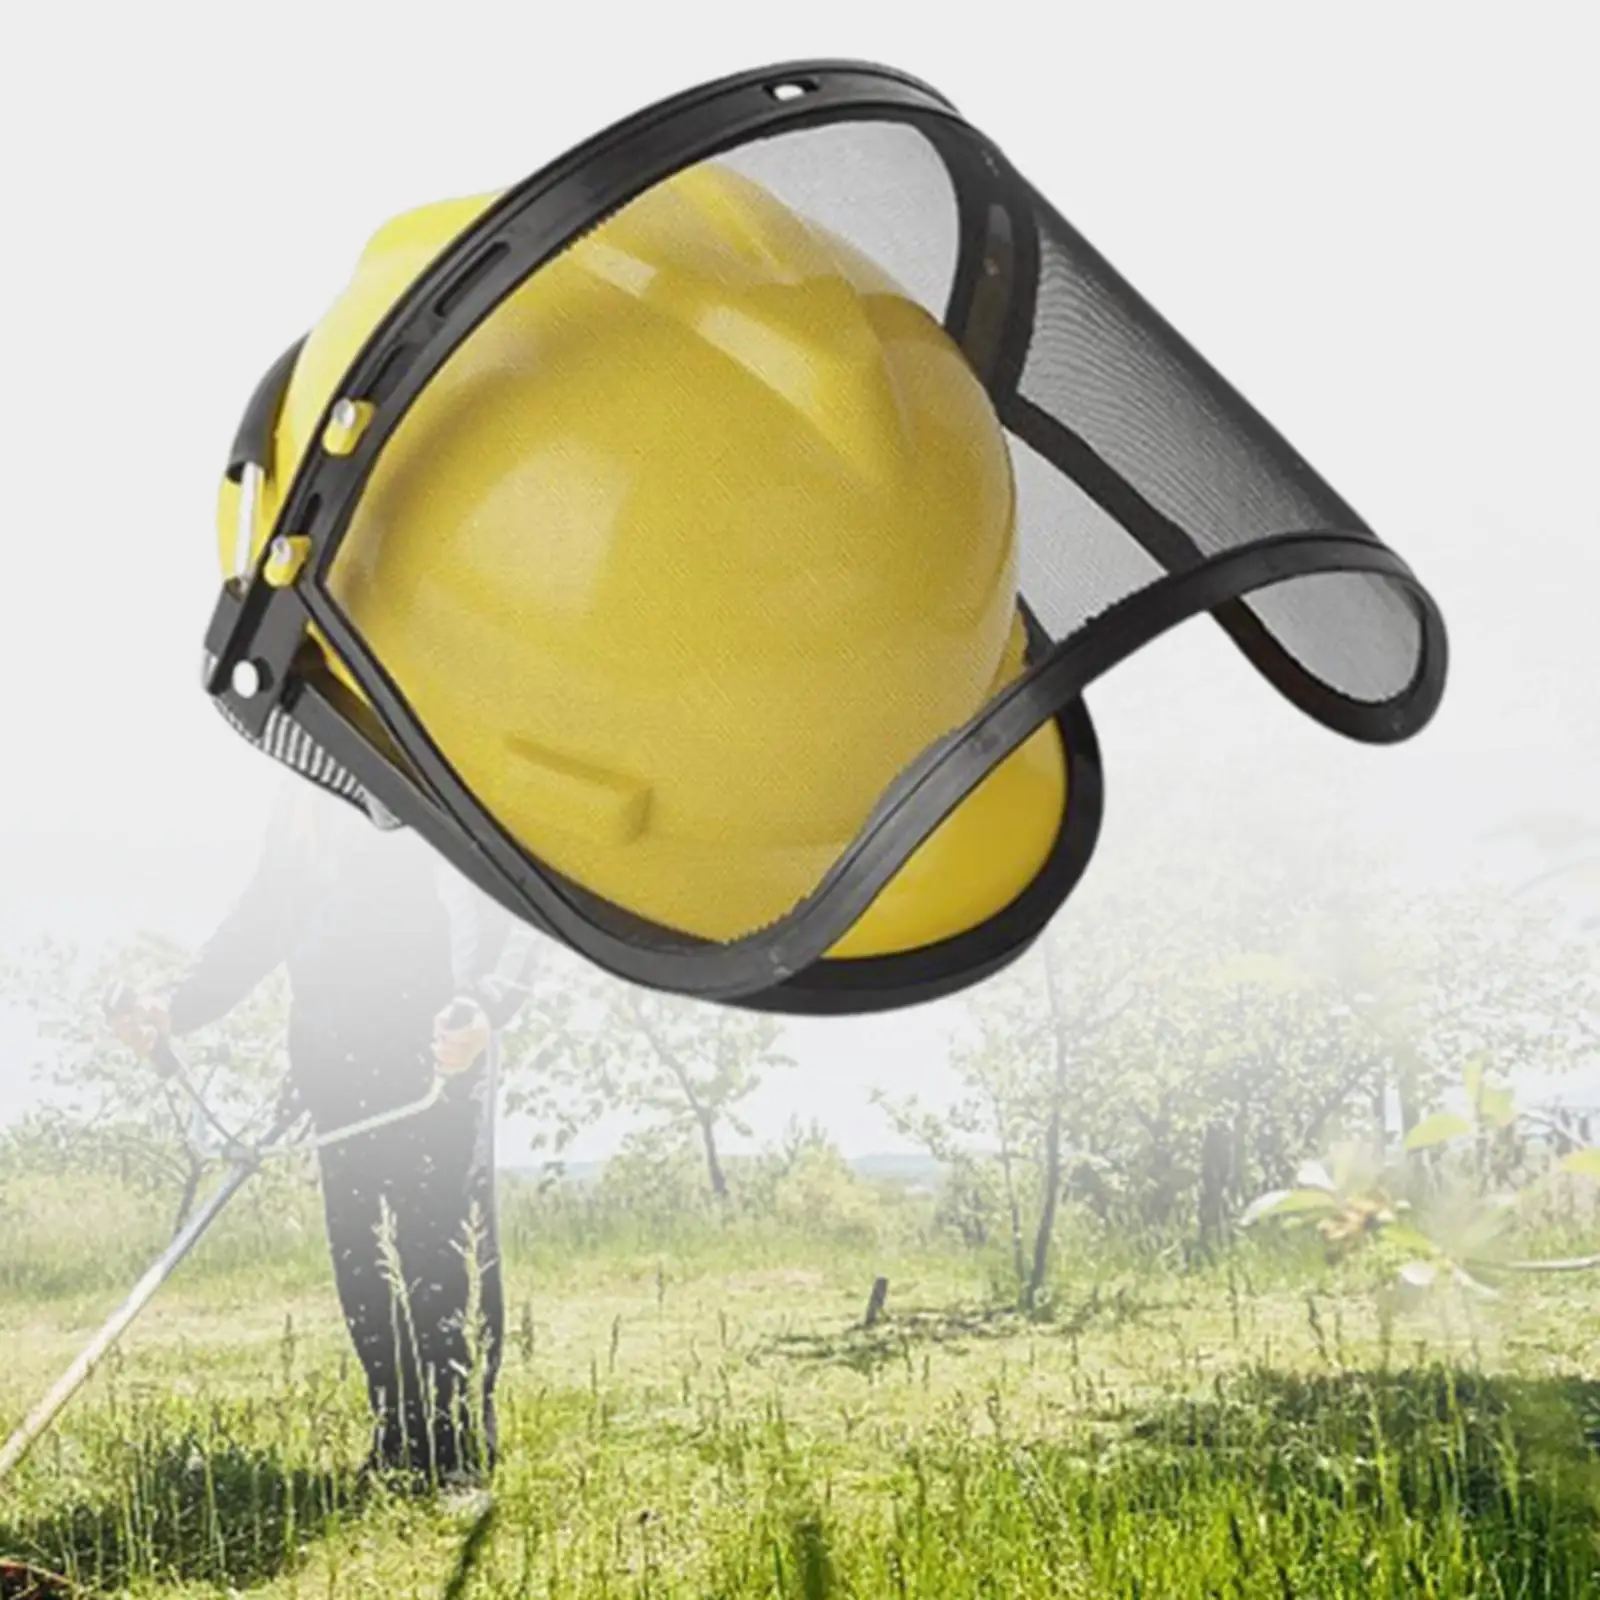 Forestry Face Shield Guards with Steel Wire Mesh Versatile Lightweight Protective for Logging Electric Cutting Durable Practical